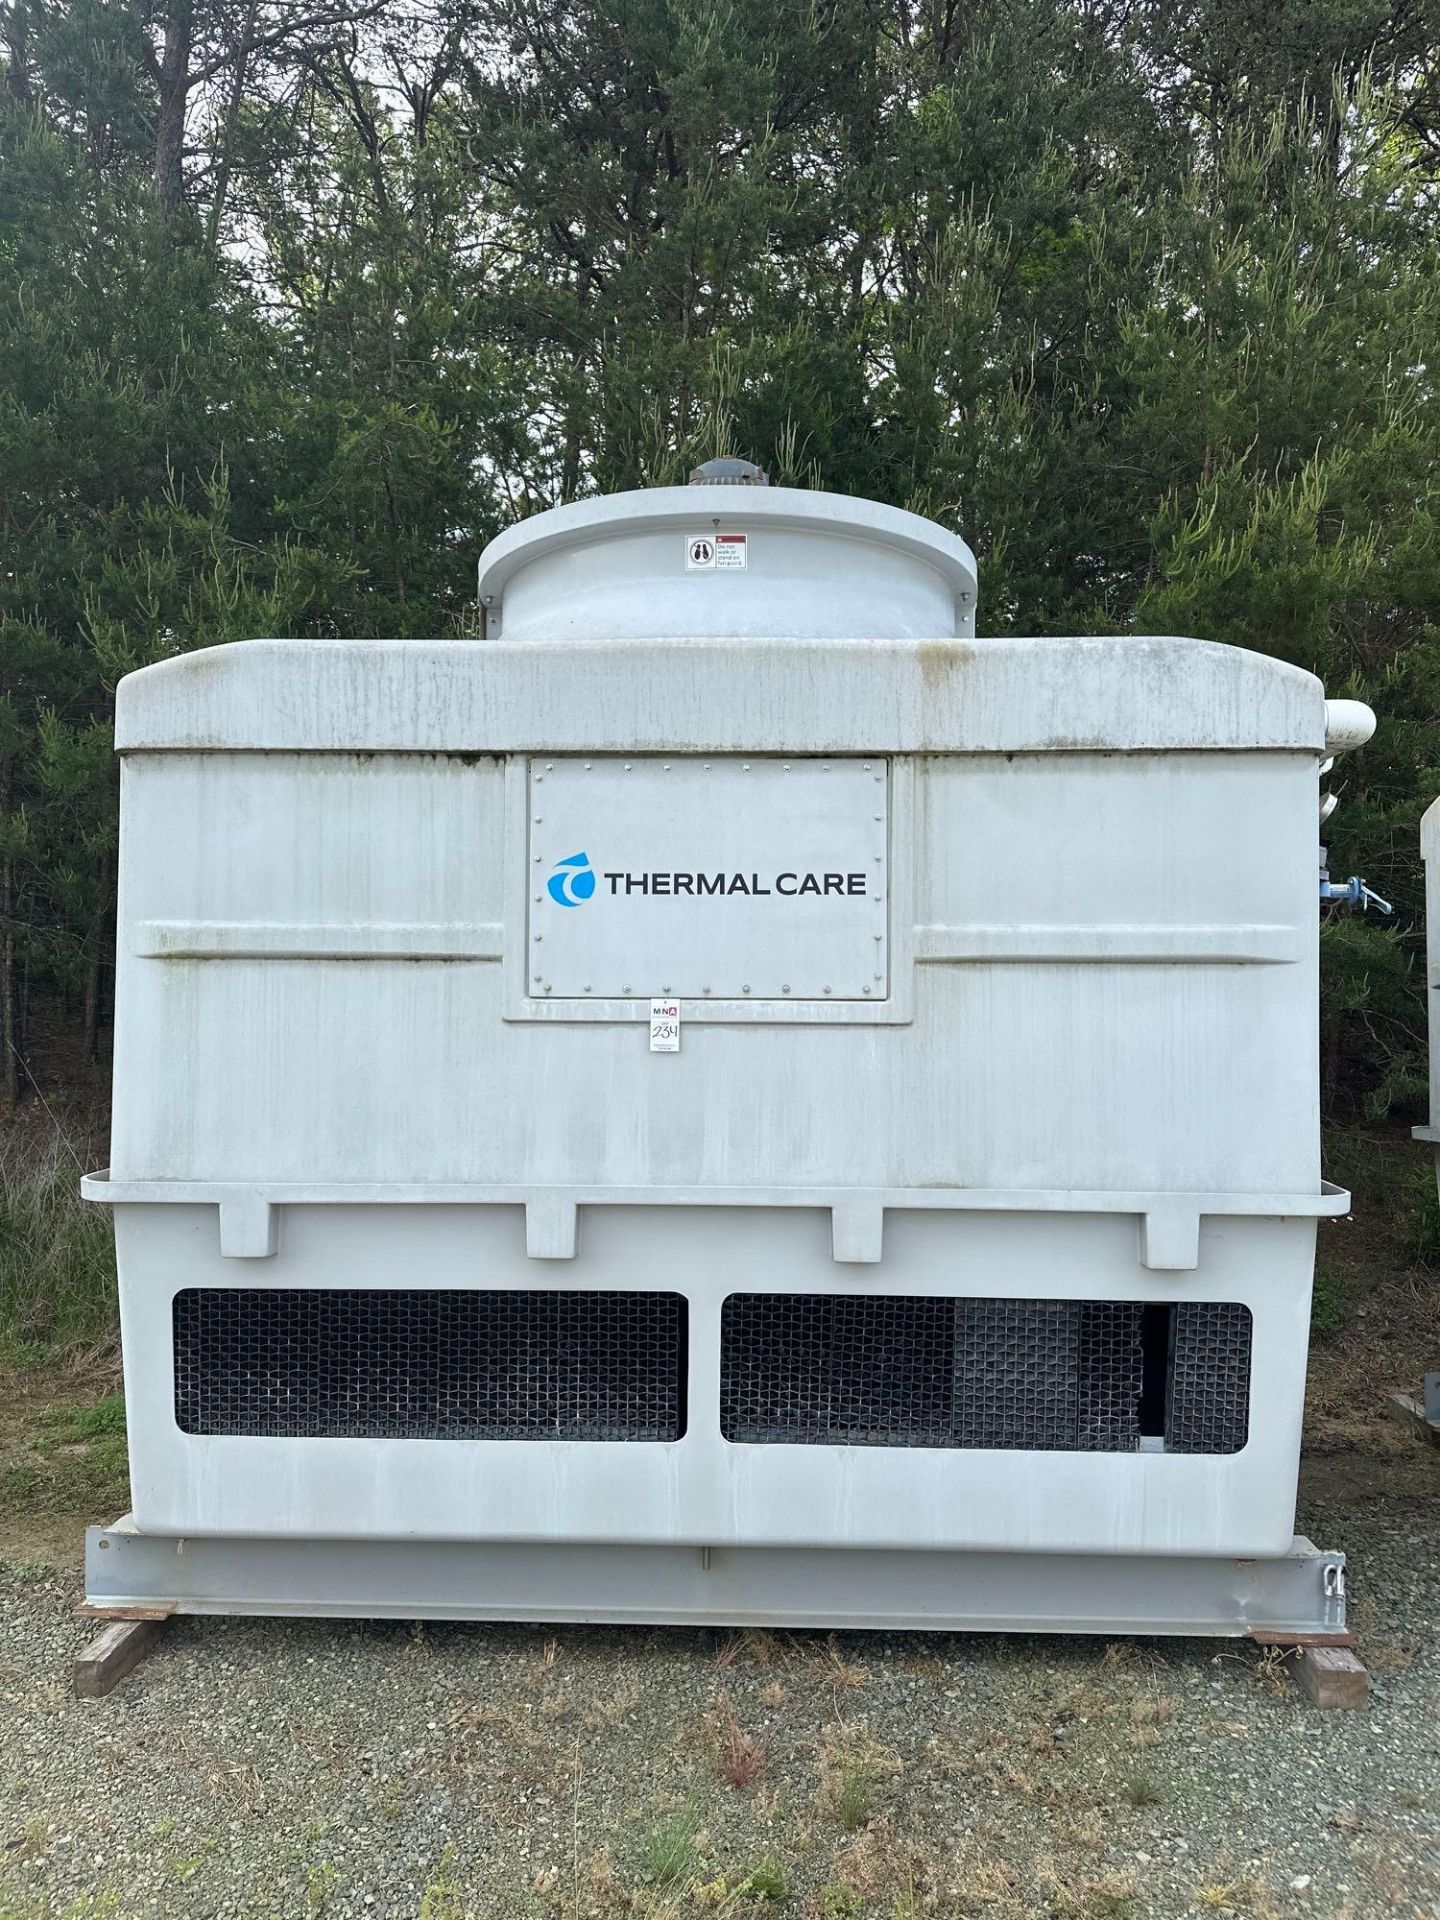 170 Ton Thermal Care Cooling Tower